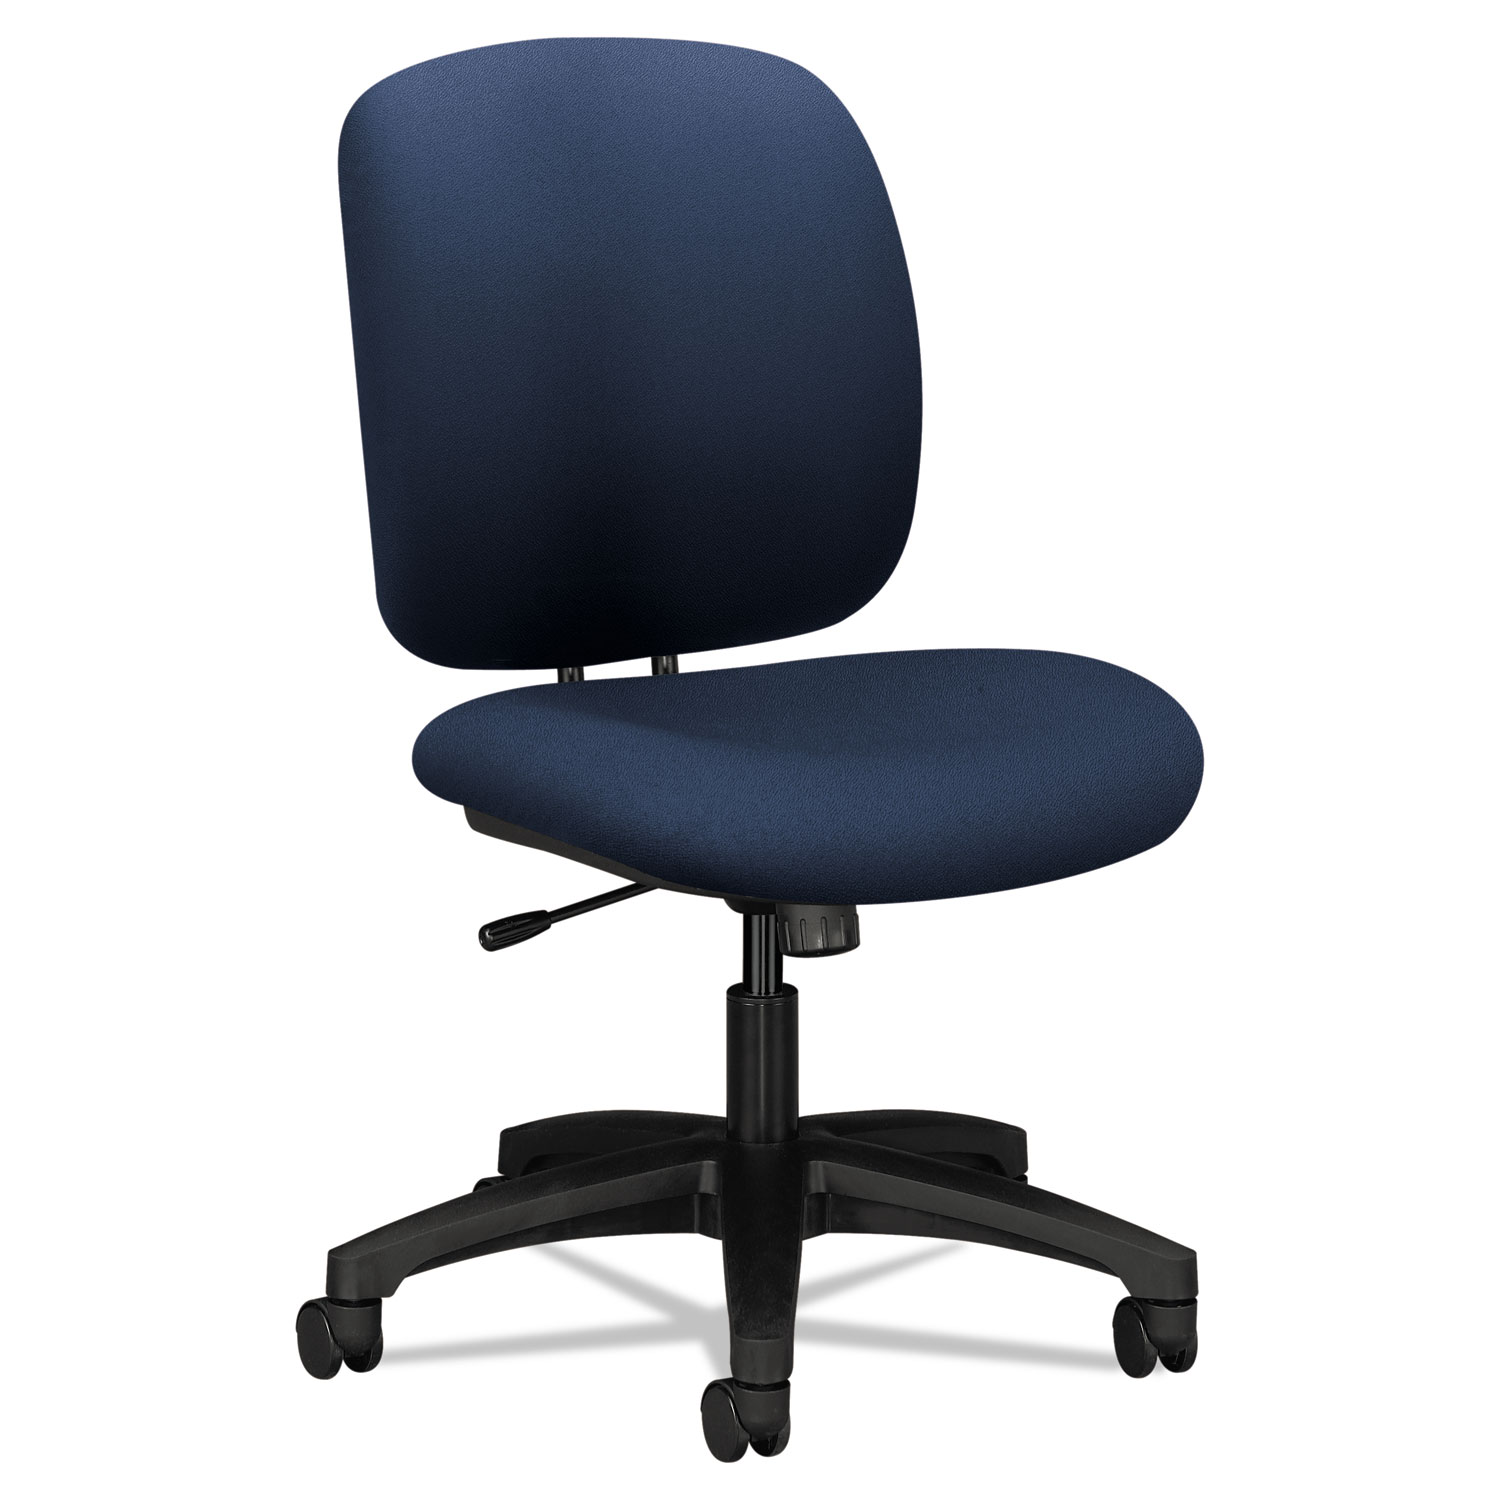  HON H5902.H.CU98.T ComforTask Task Chair, Supports up to 300 lbs, Navy Seat, Navy Back, Black Base (HON5902CU98T) 